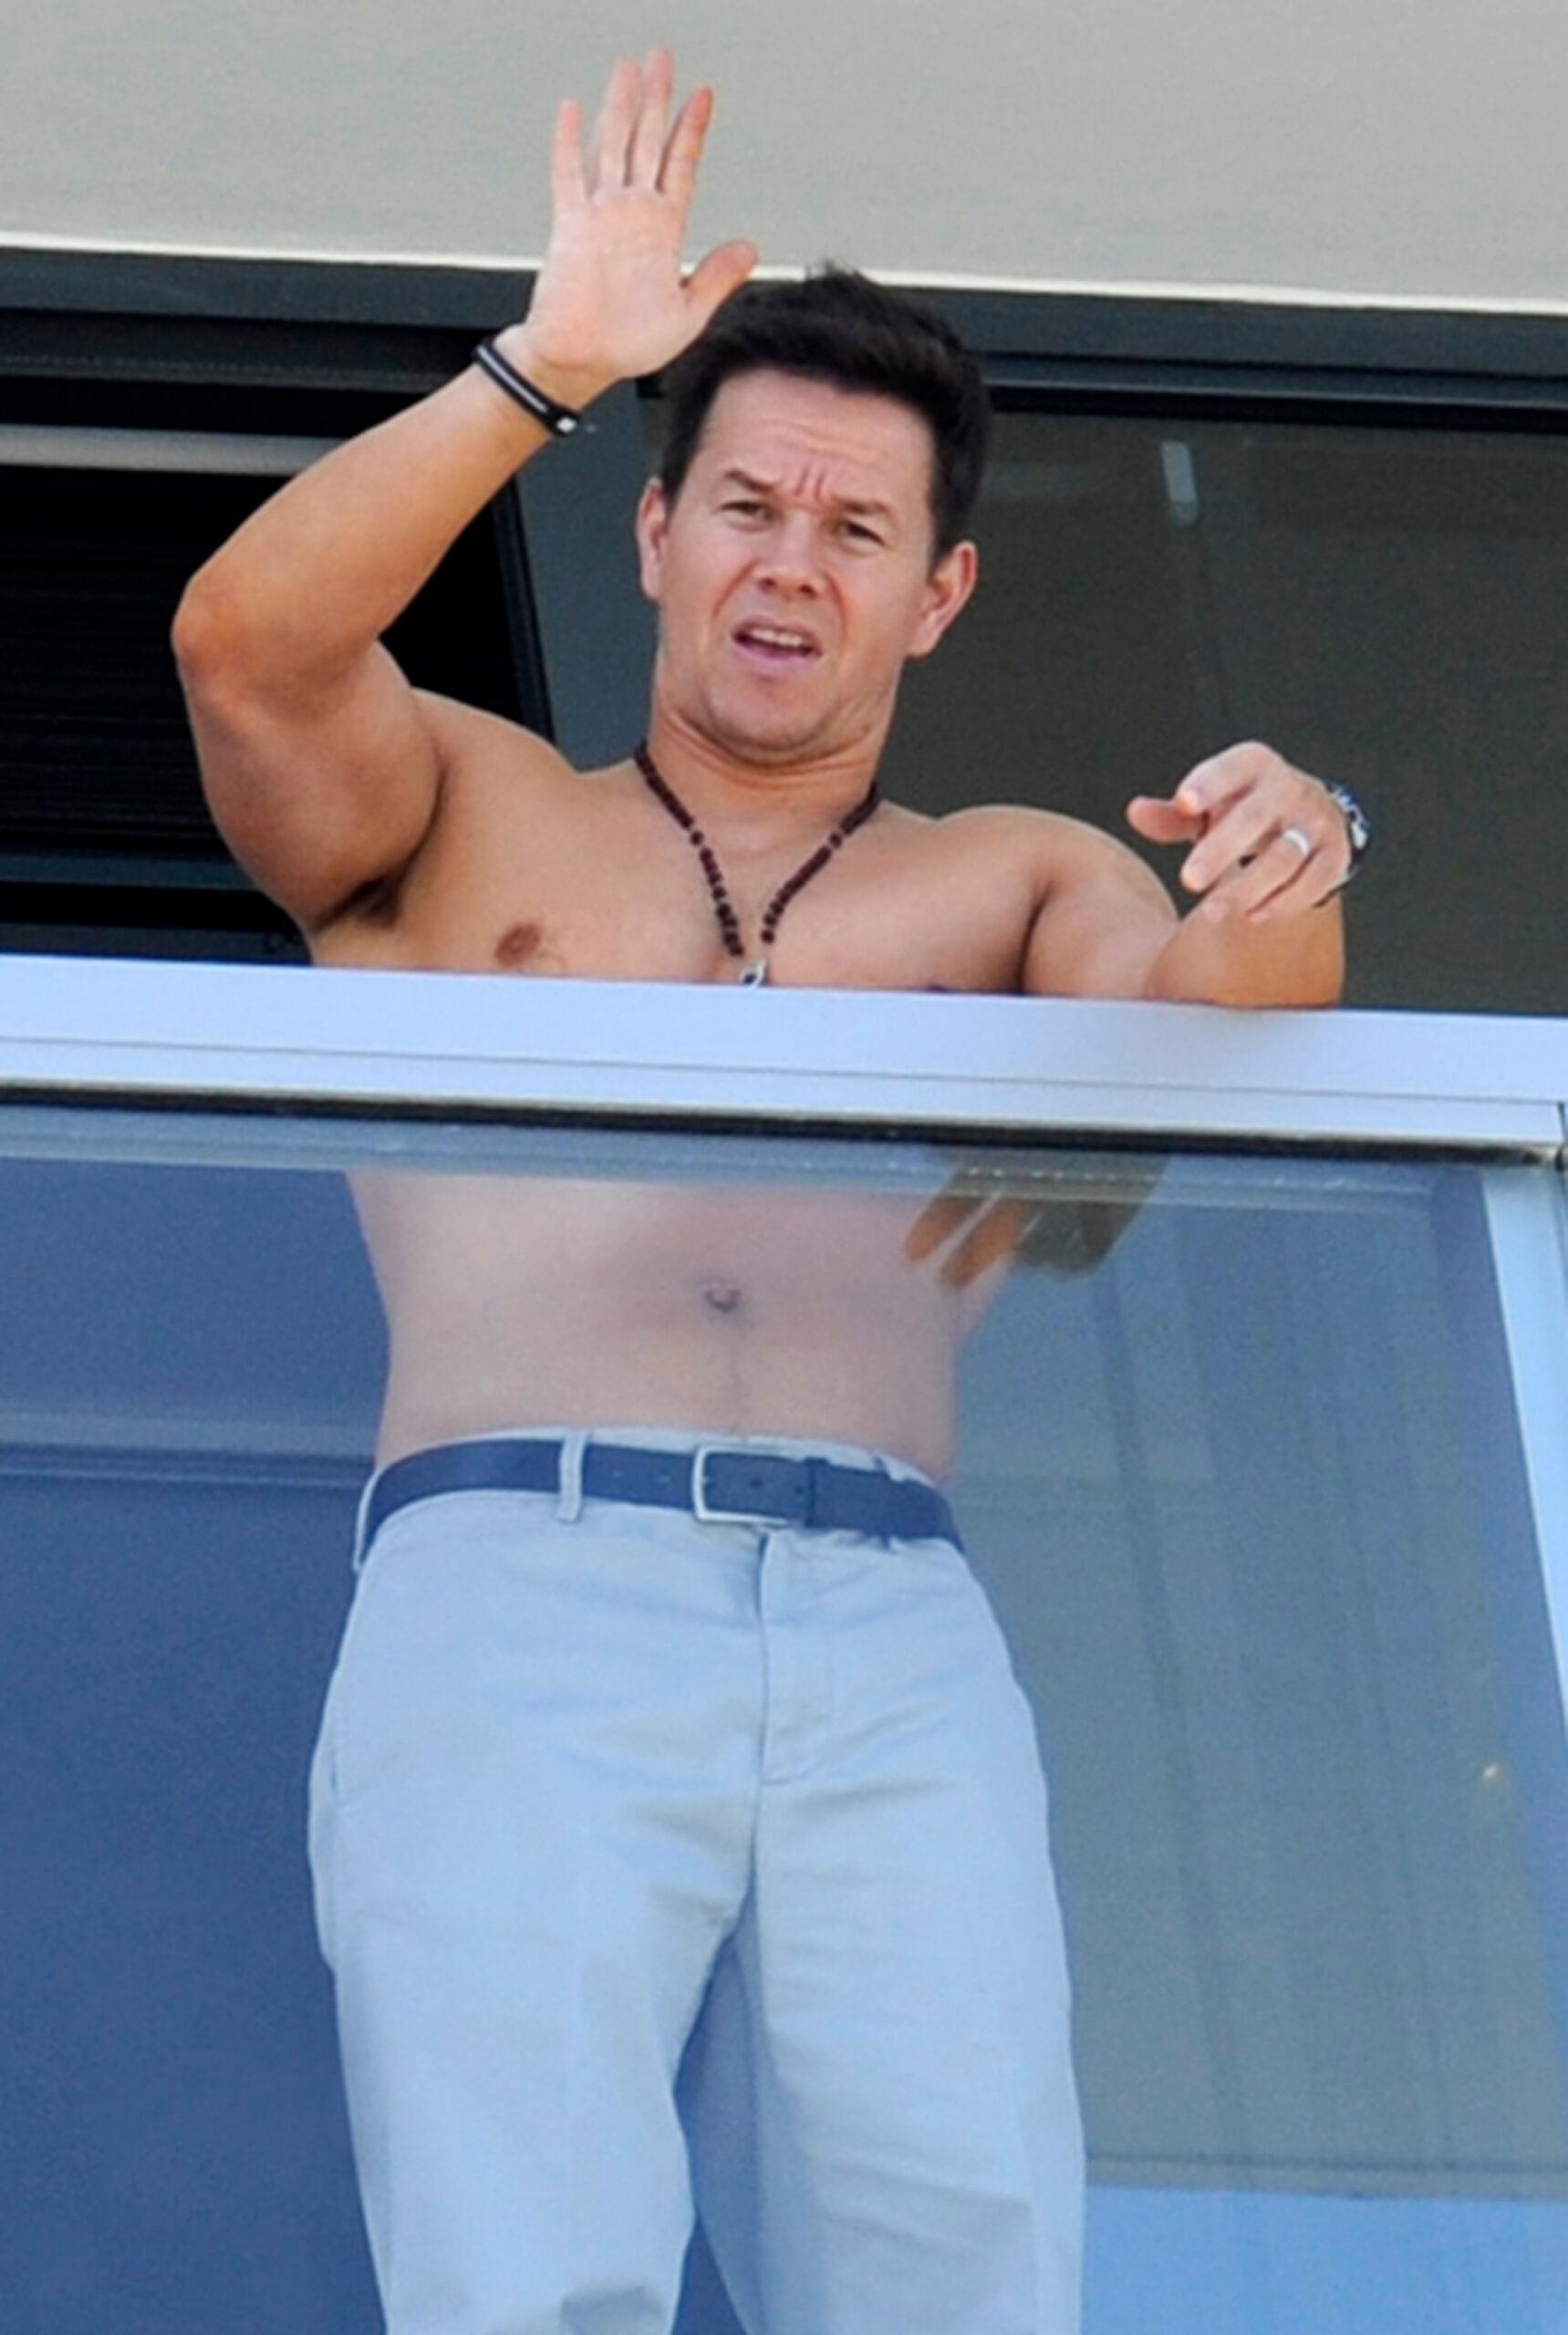 Mark Wahlberg shows off his muscles while waving shirtless from his South Beach hotel balcony